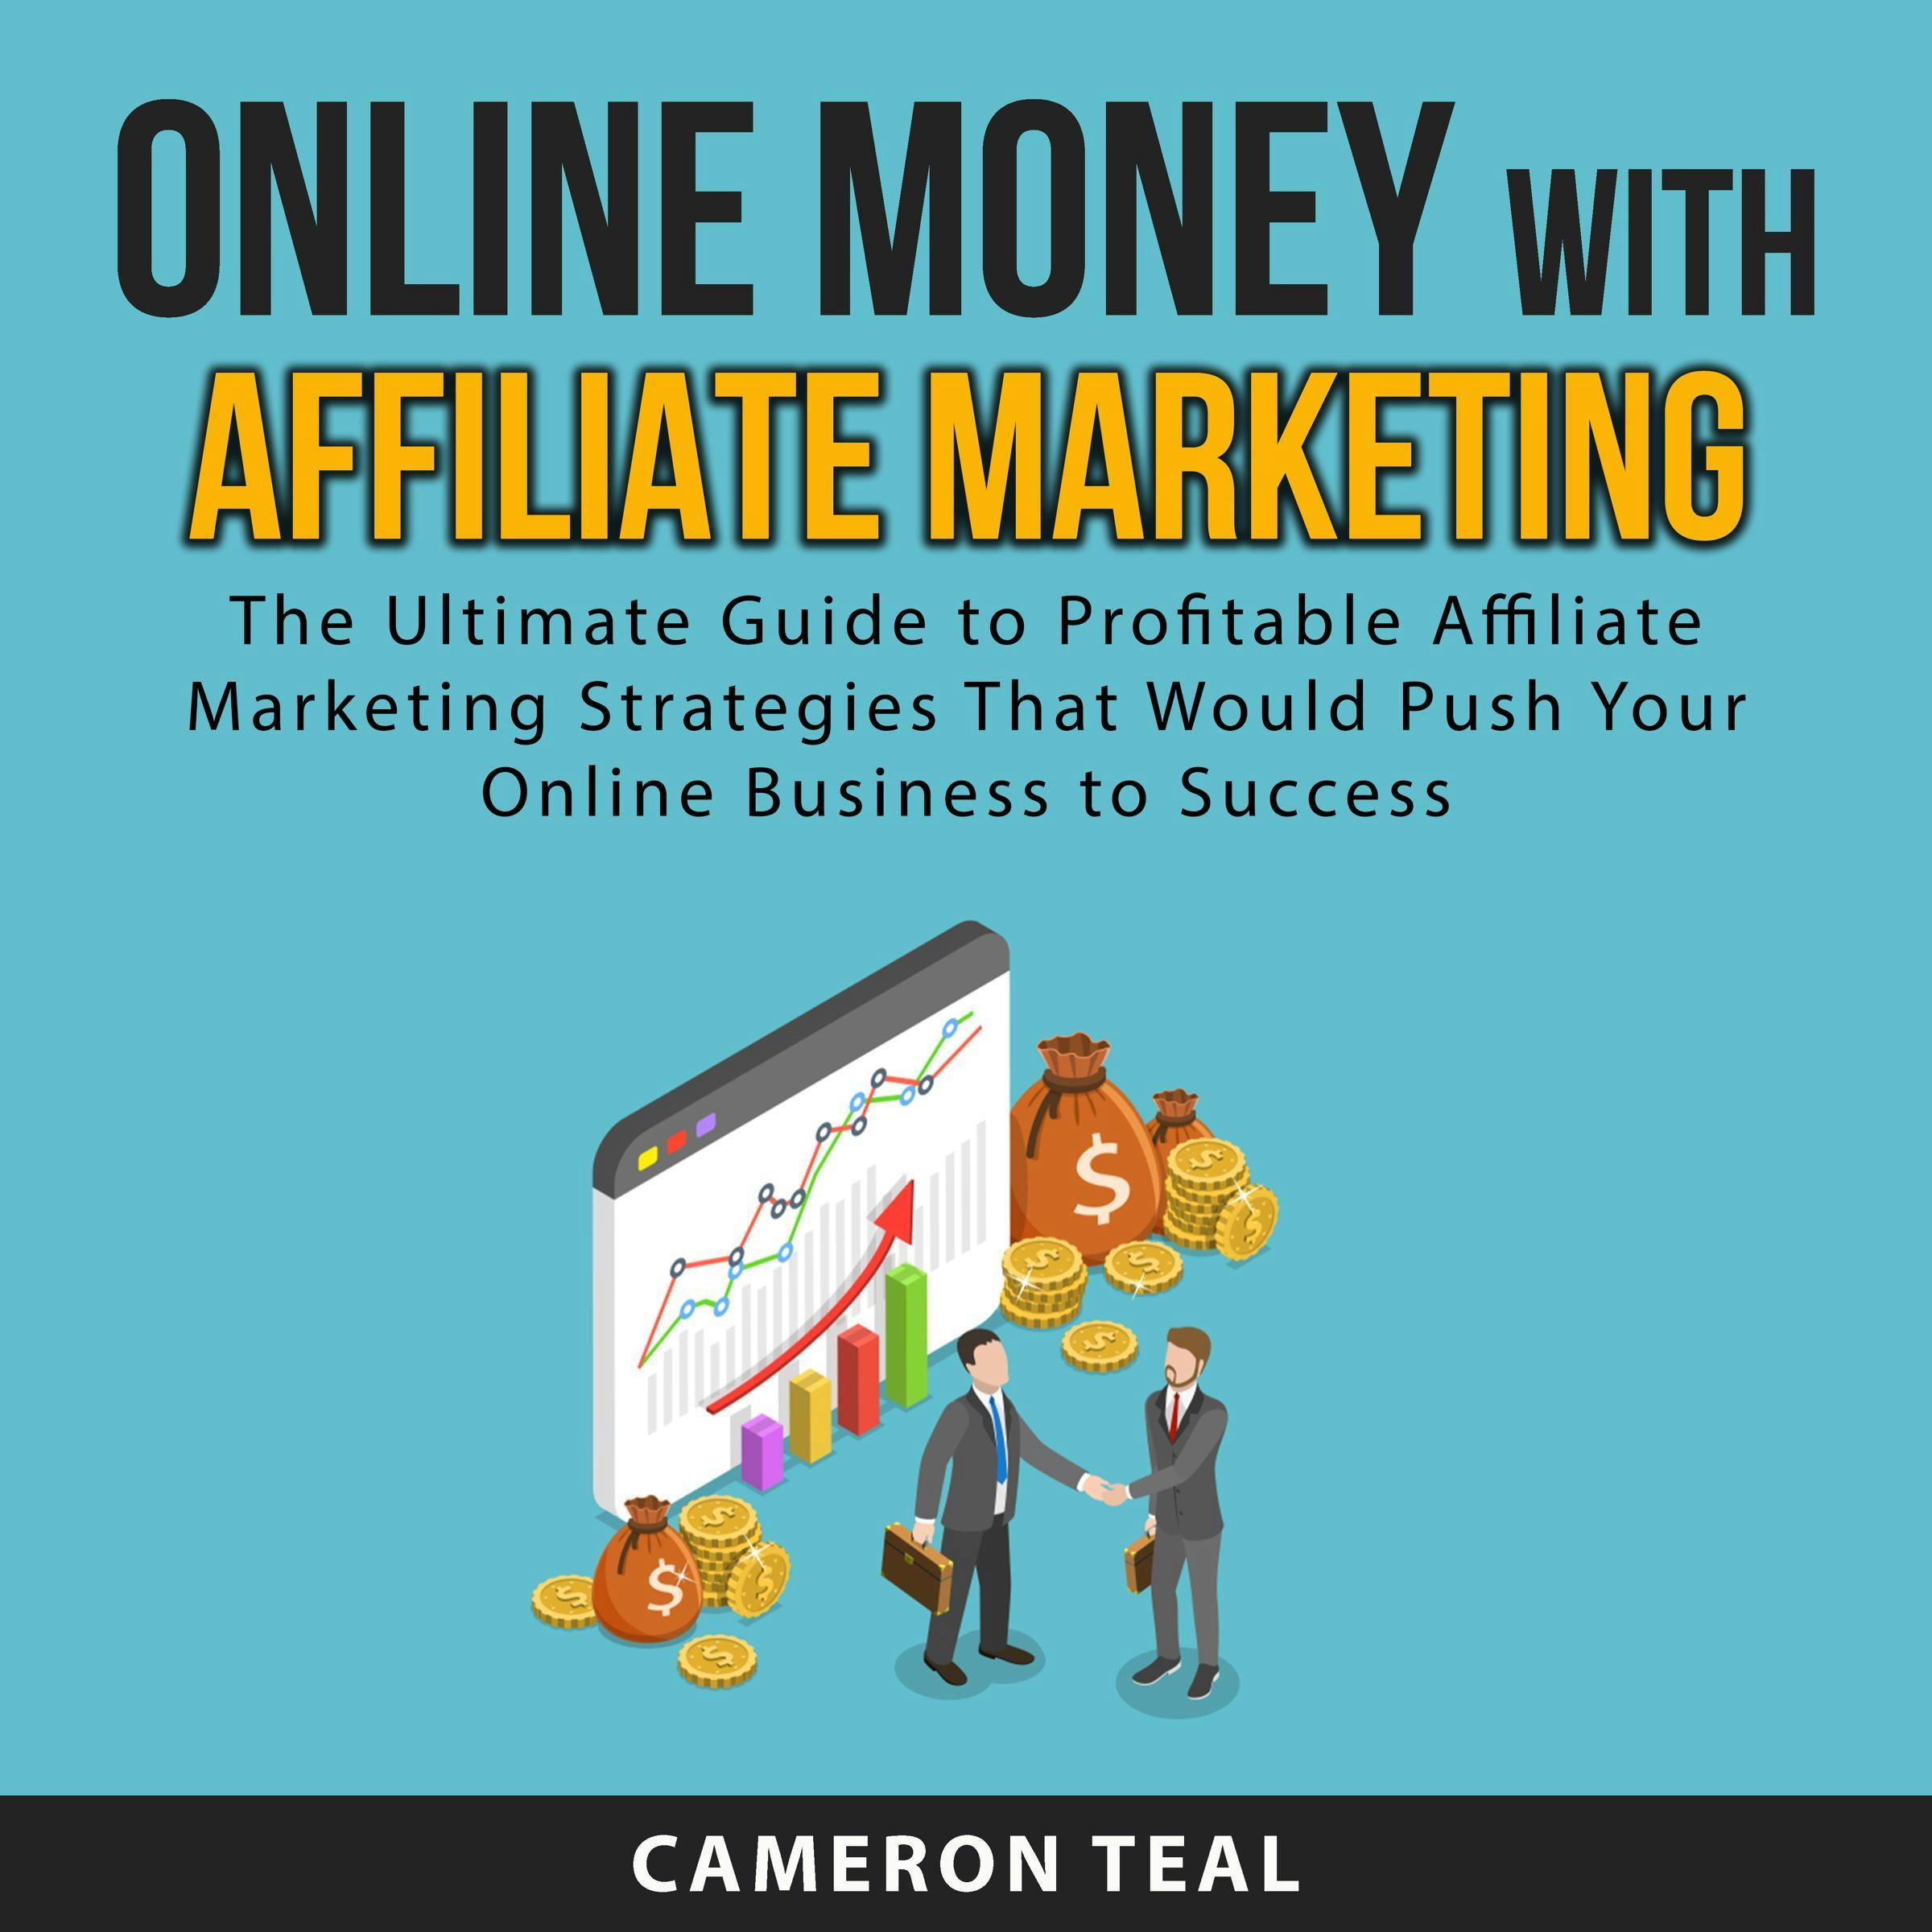 Online Money With Affiliate Marketing: The Ultimate Guide to Profitable Affiliate Marketing Strategies That Would Push Your Online Business to Success - undefined